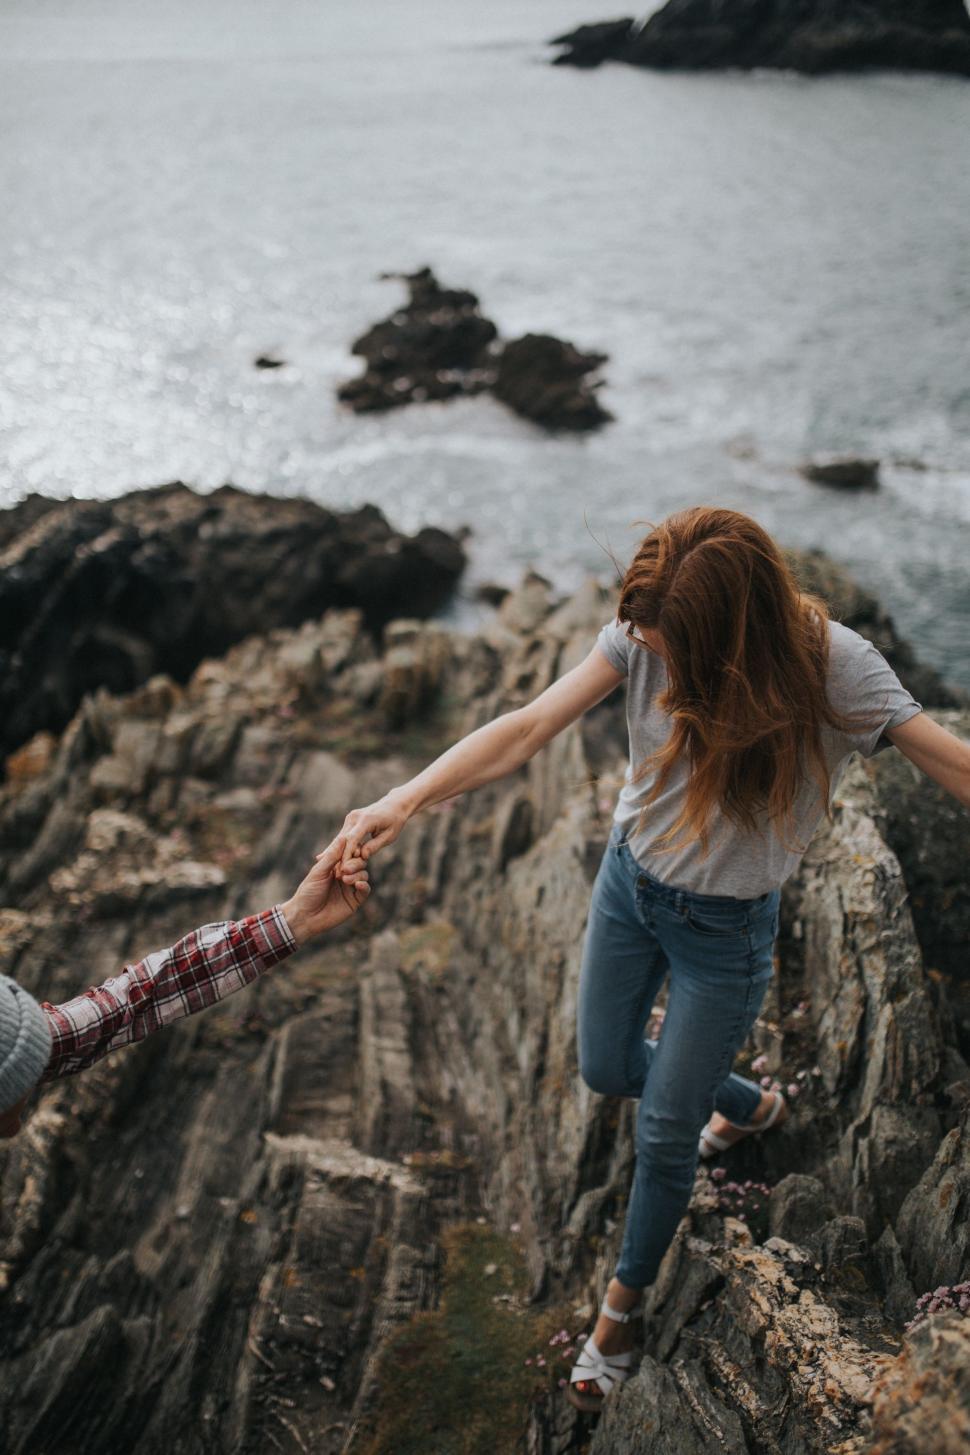 Free Image of Two People Holding Hands on a Rocky Cliff 